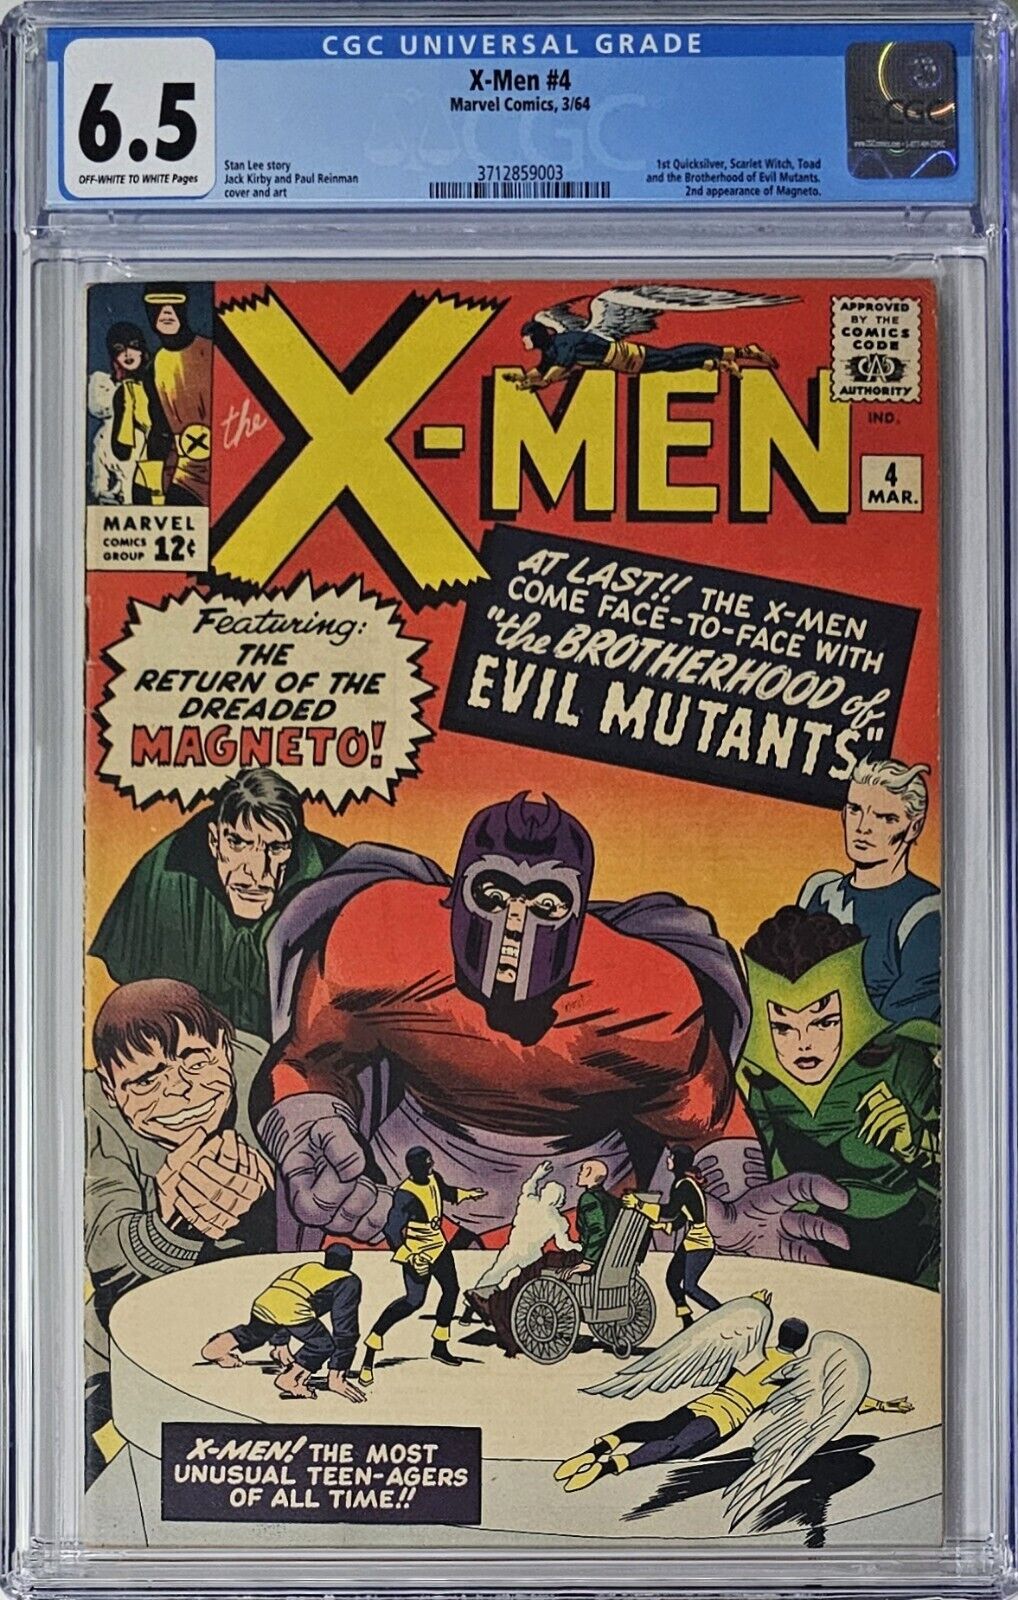 X-Men #4 CGC 6.5 Marvel Comic 1964 1st Appearance of Quicksilver & Scarlet Witch